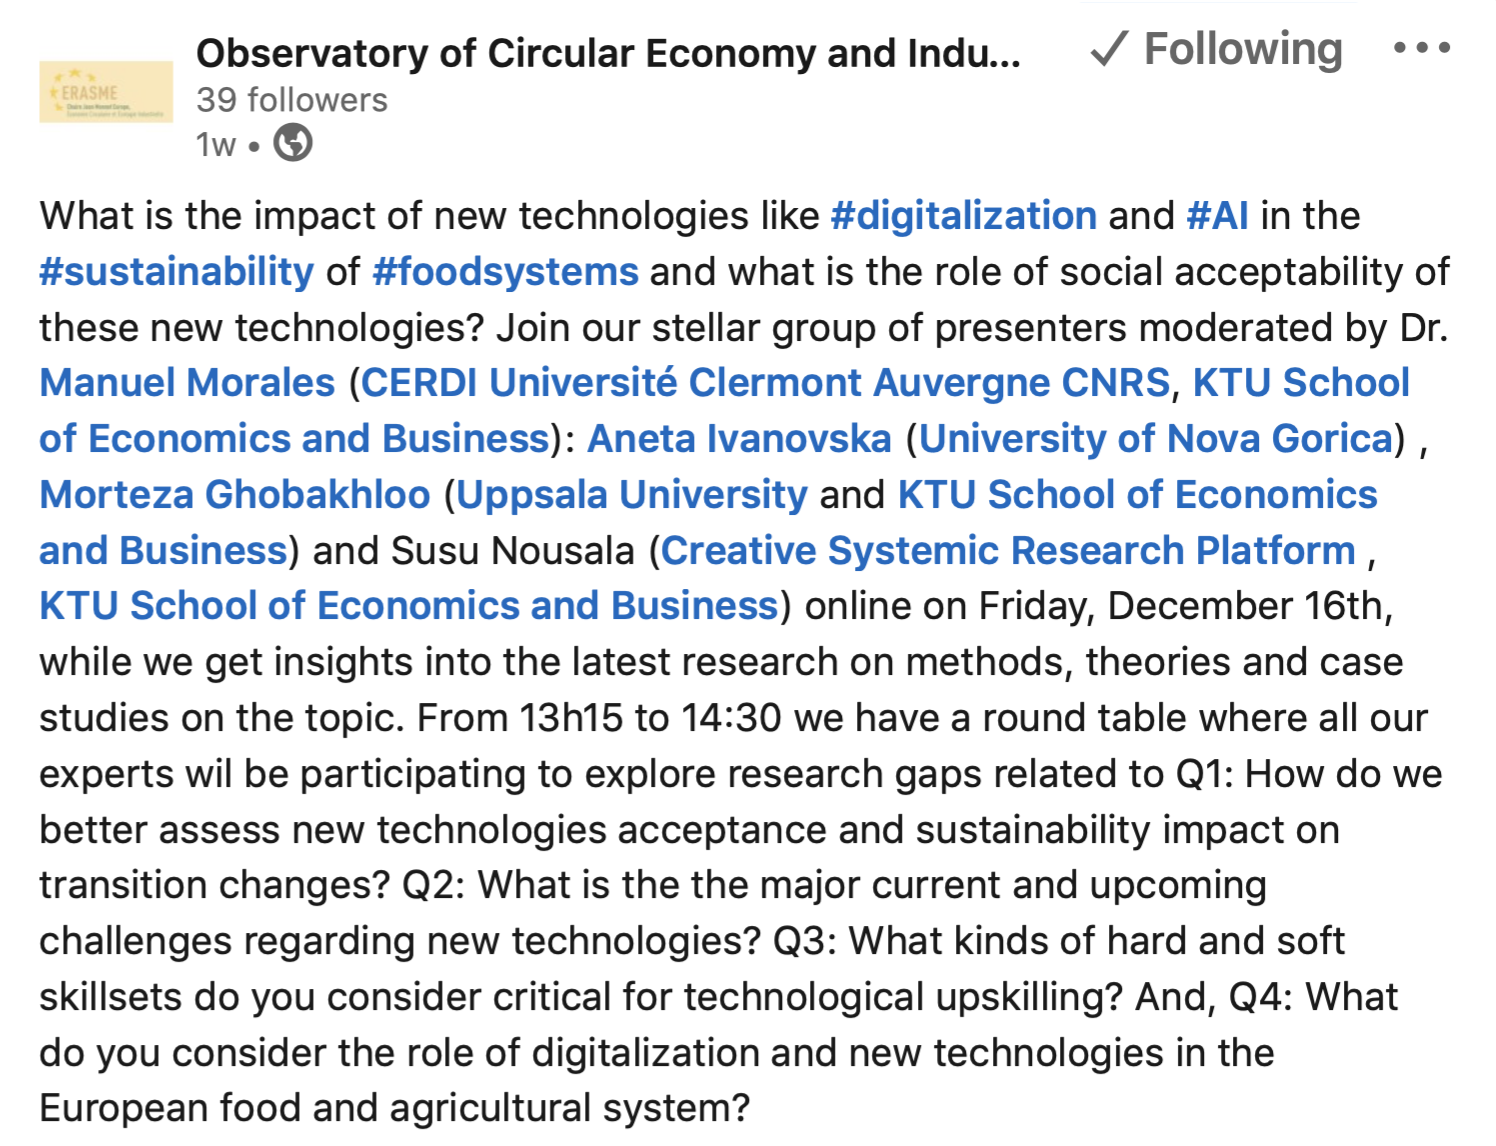 At the Observatory of Circular Economy and Industrial Ecology